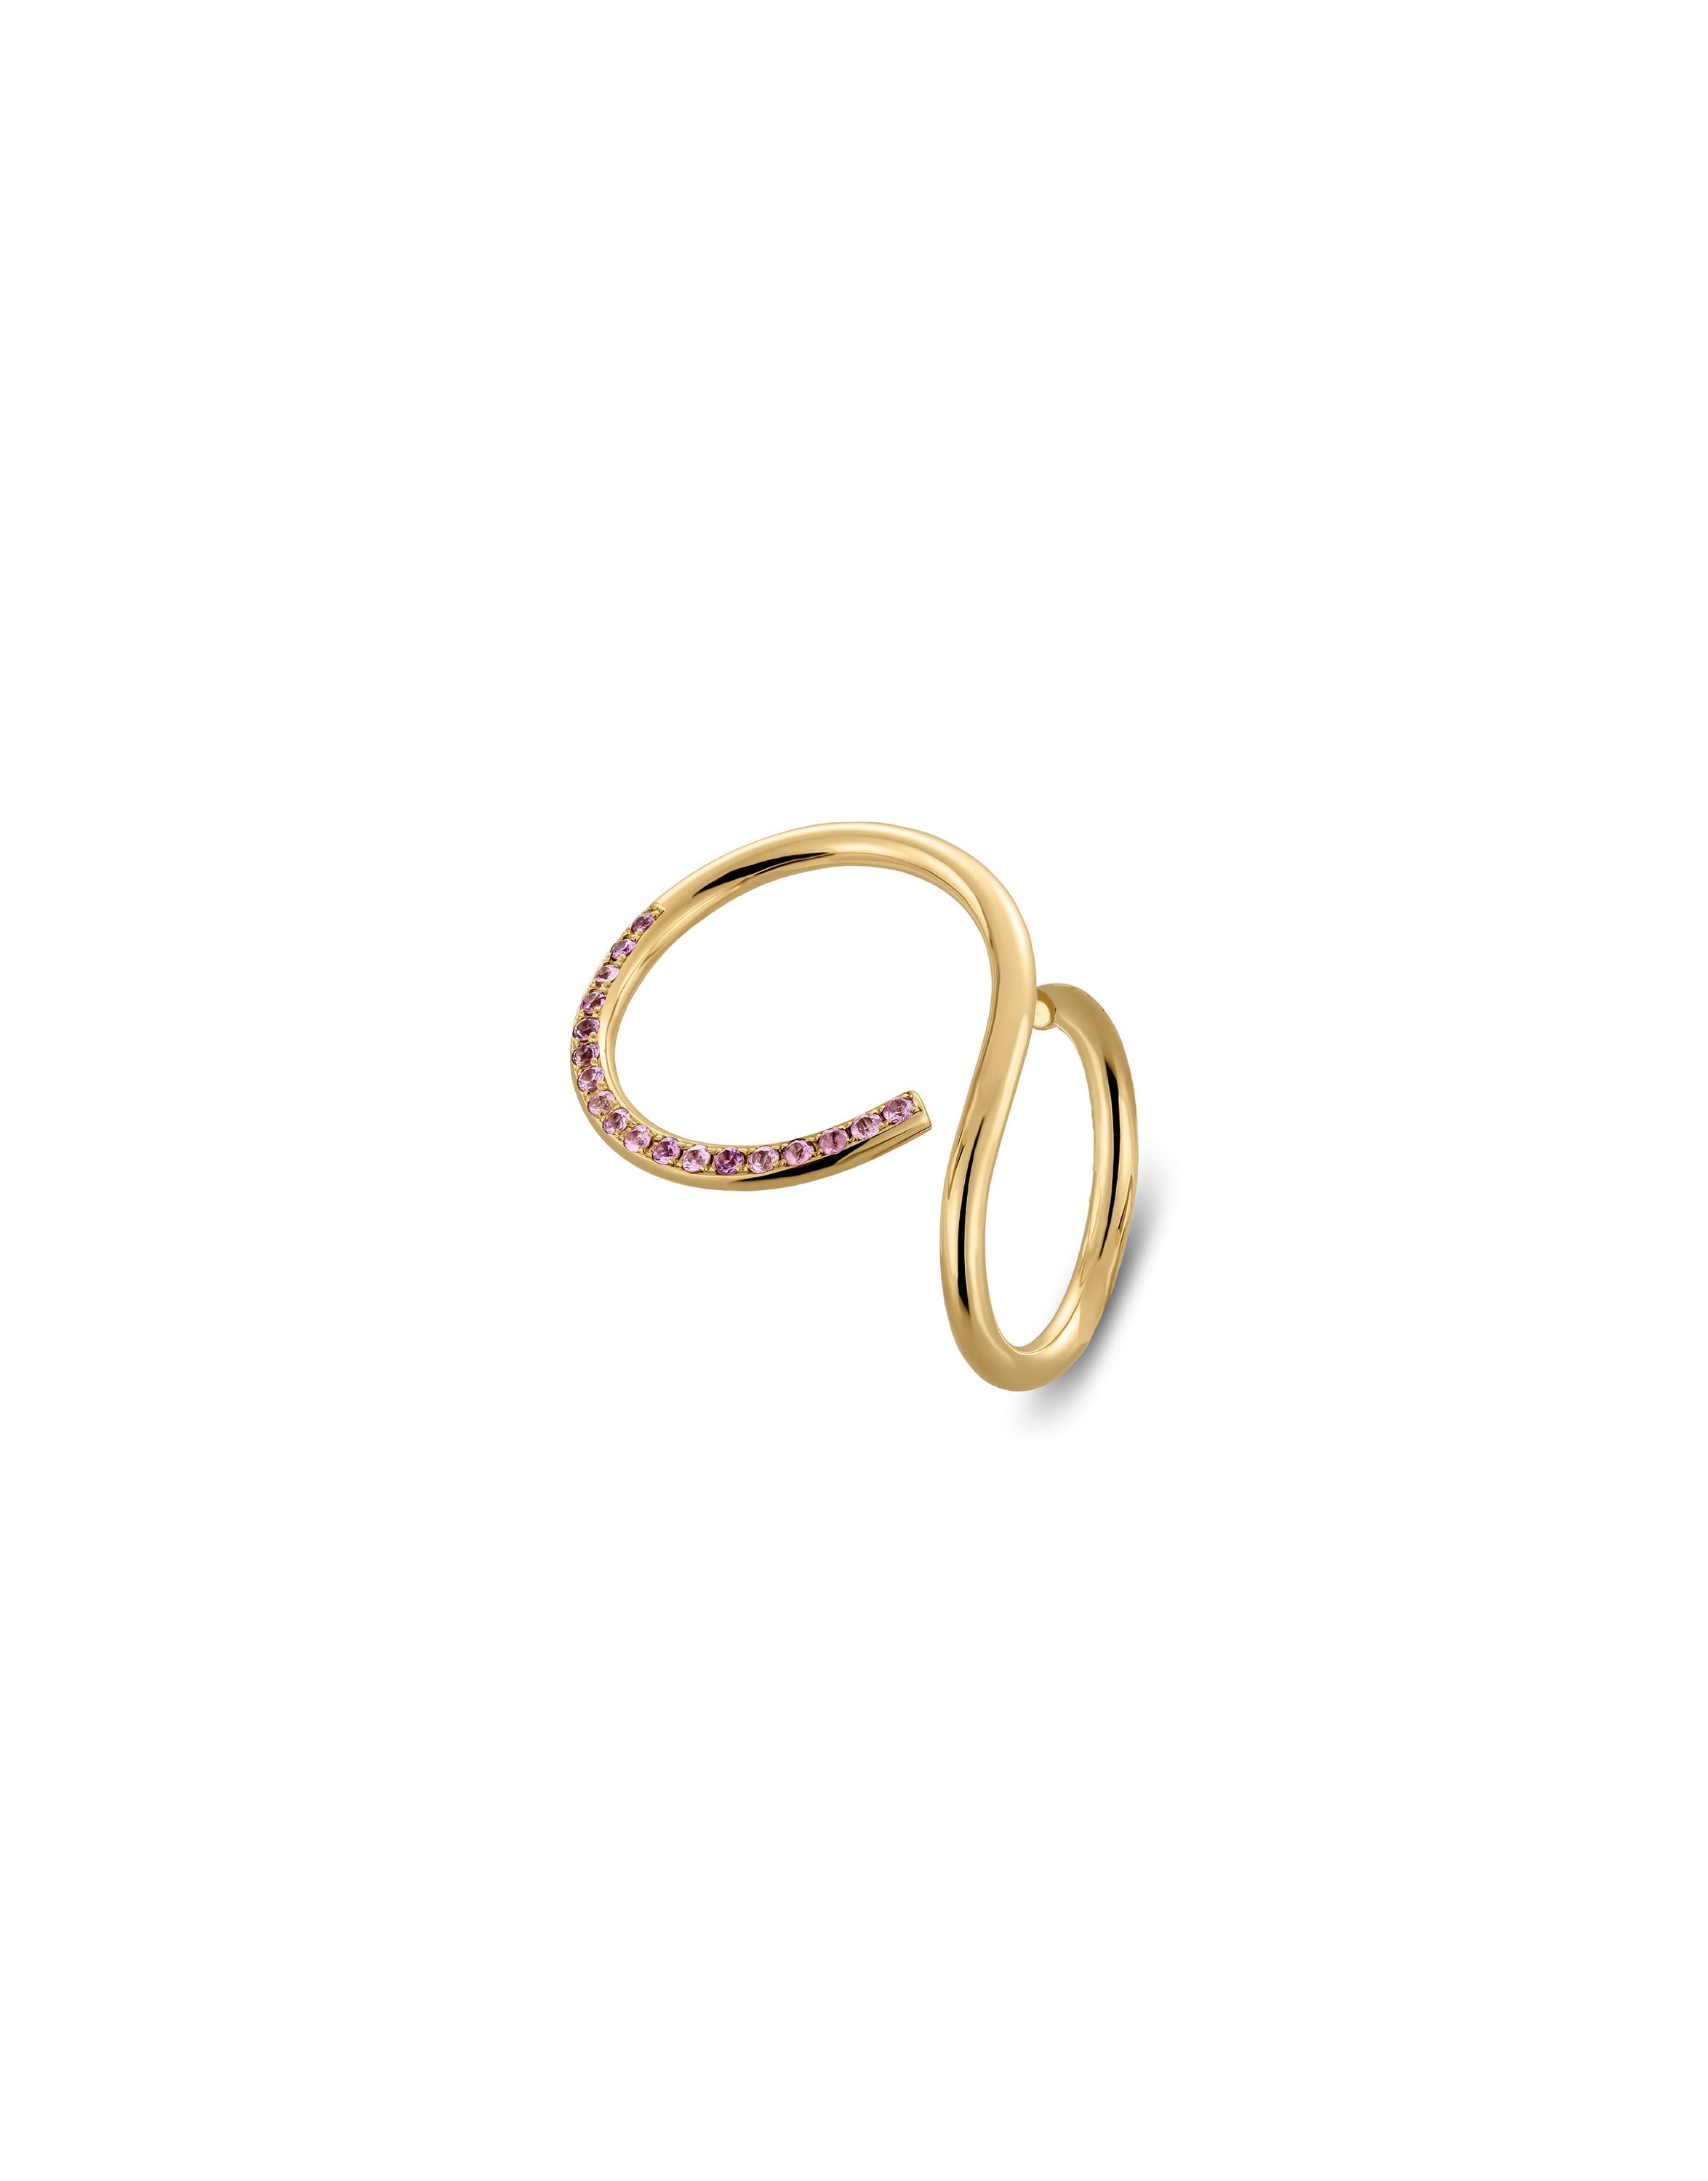 CURL RING PINK SAPPHIRES GOLD Rings Nayestones 